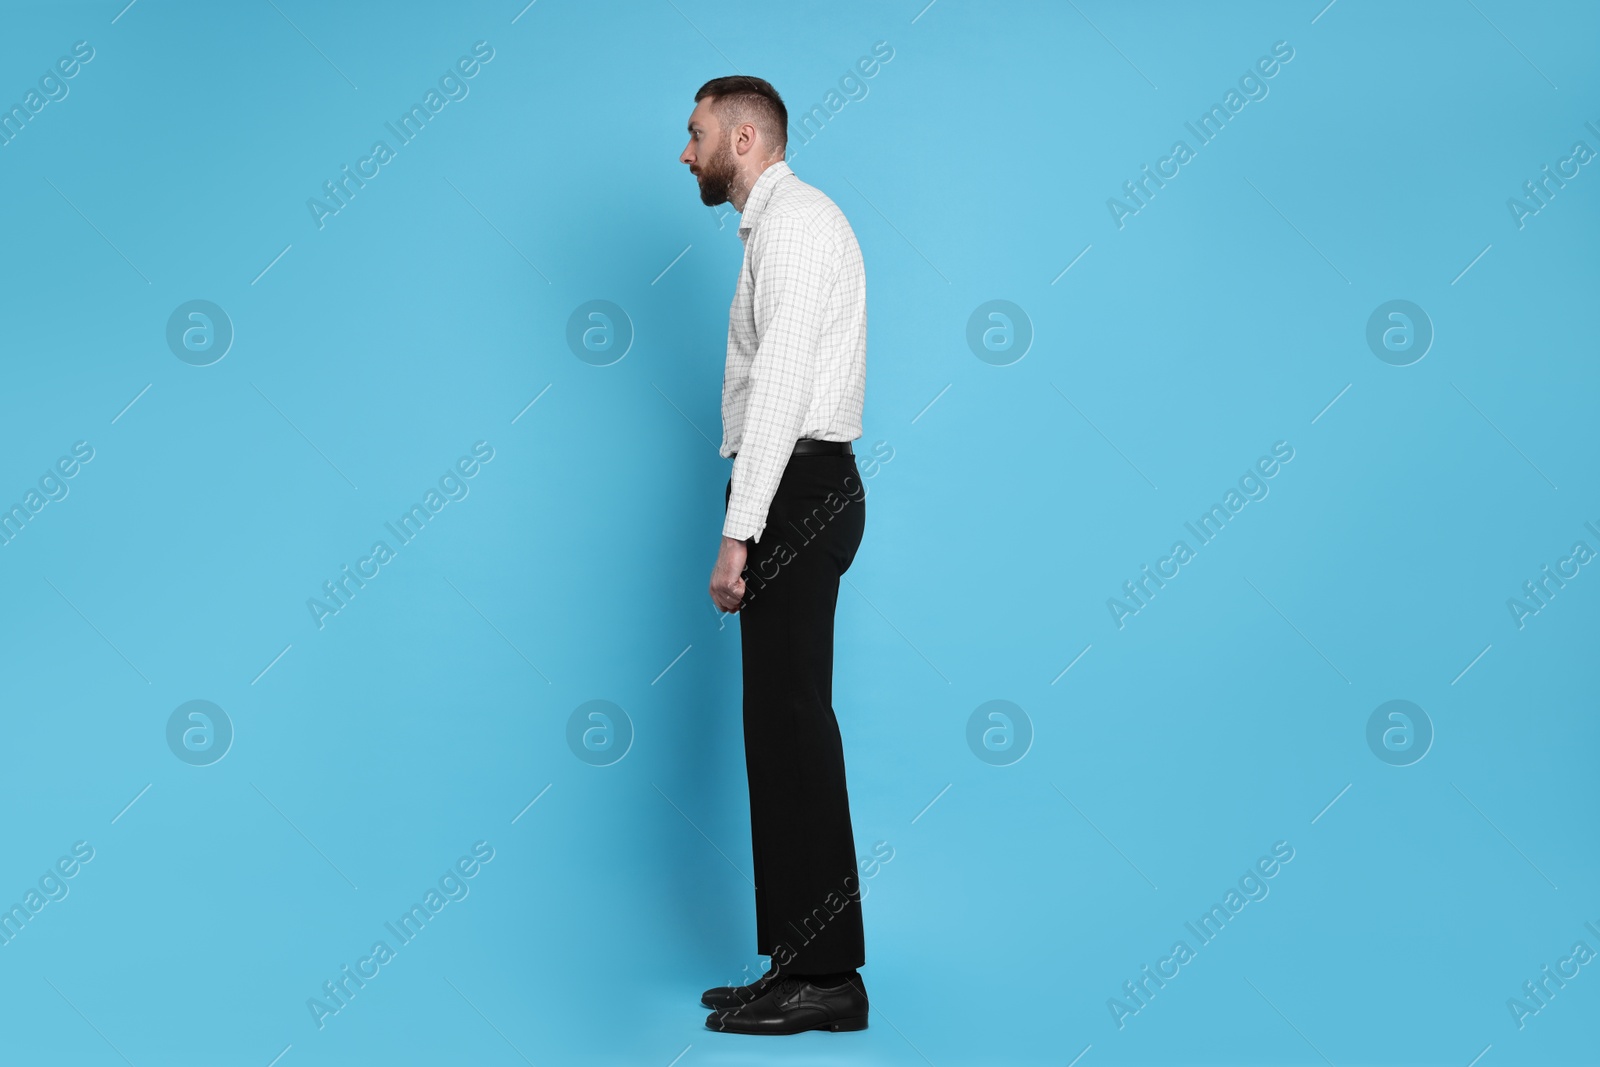 Photo of Man with poor posture on light blue background